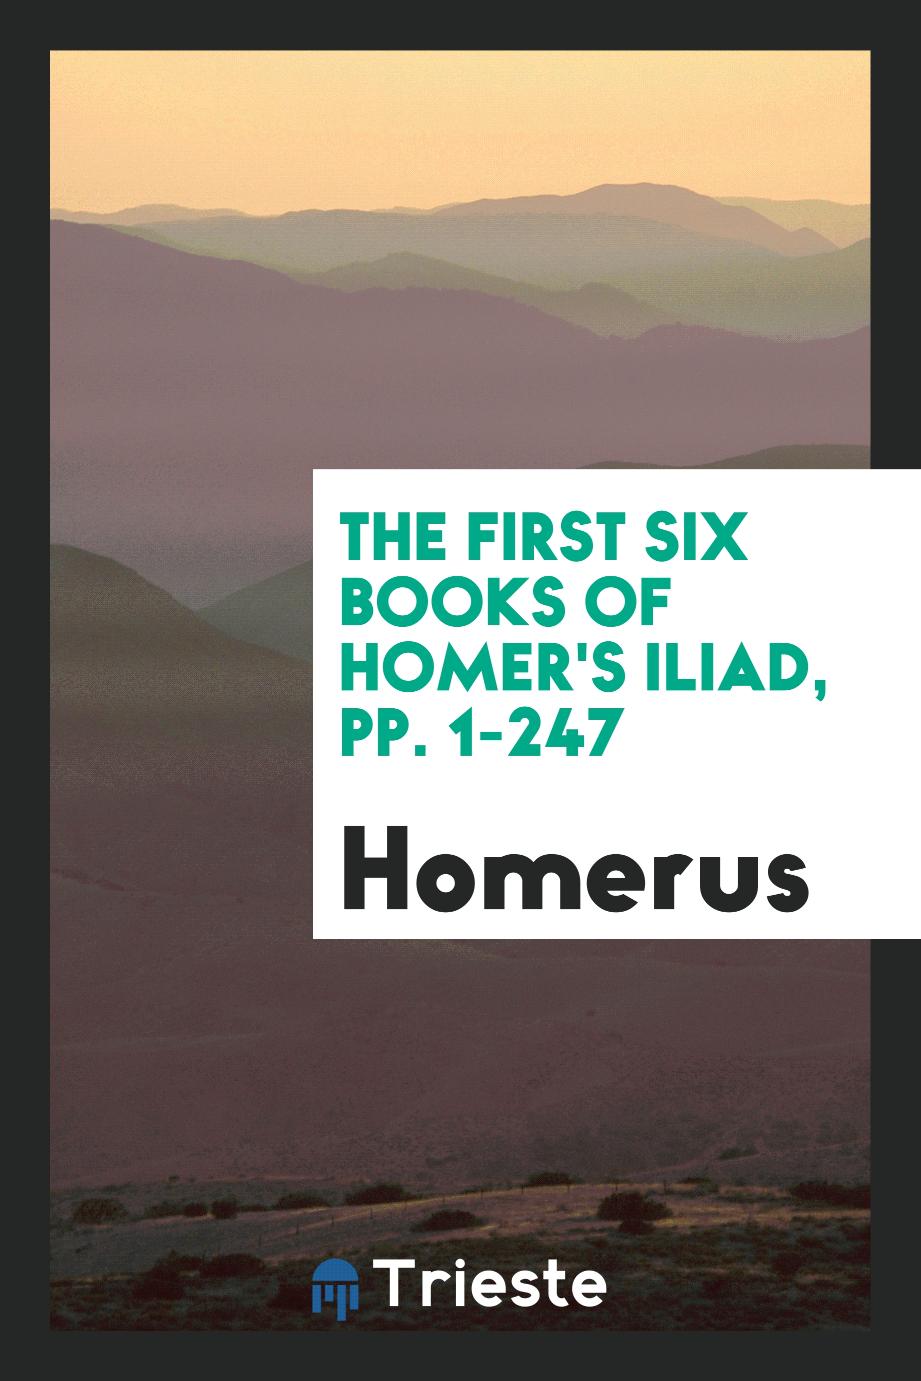 The First Six Books of Homer's Iliad, pp. 1-247